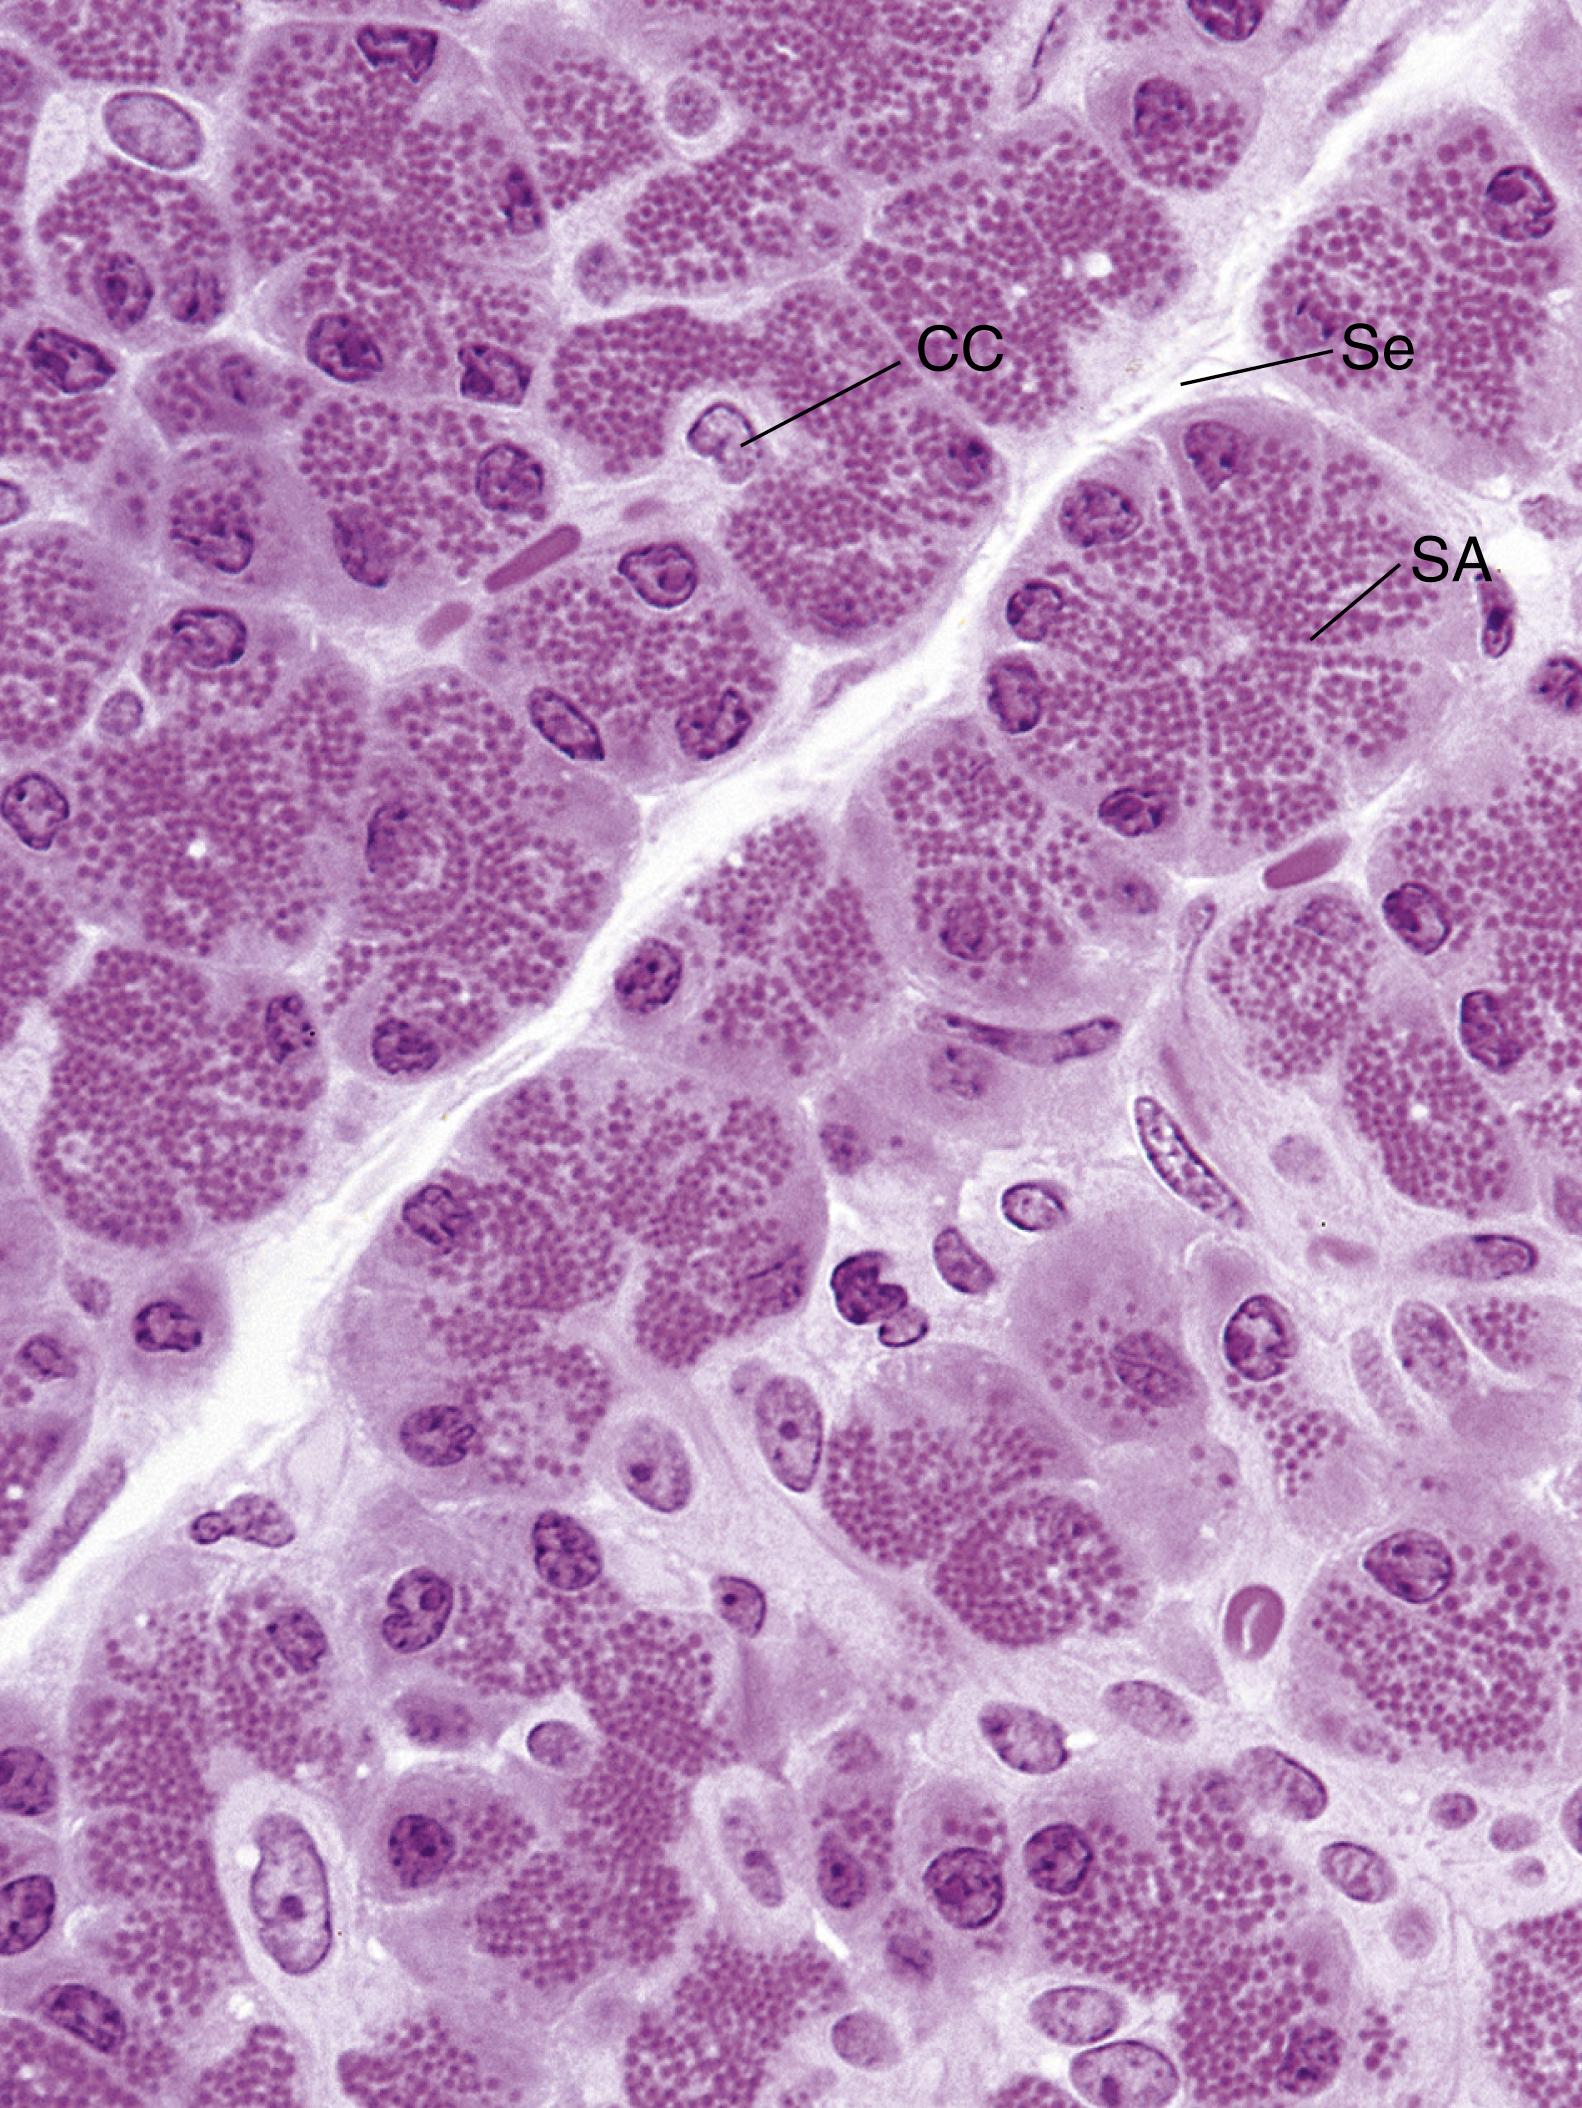 Fig. 18.13, Photomicrograph of the monkey exocrine pancreas. Observe that the acini in section appear to be round structures, and much of the acinar cells have many secretory granules, known as zymogen granules . CC, Centroacinar cell; Se, septum; SA, serous acinus. (×540)